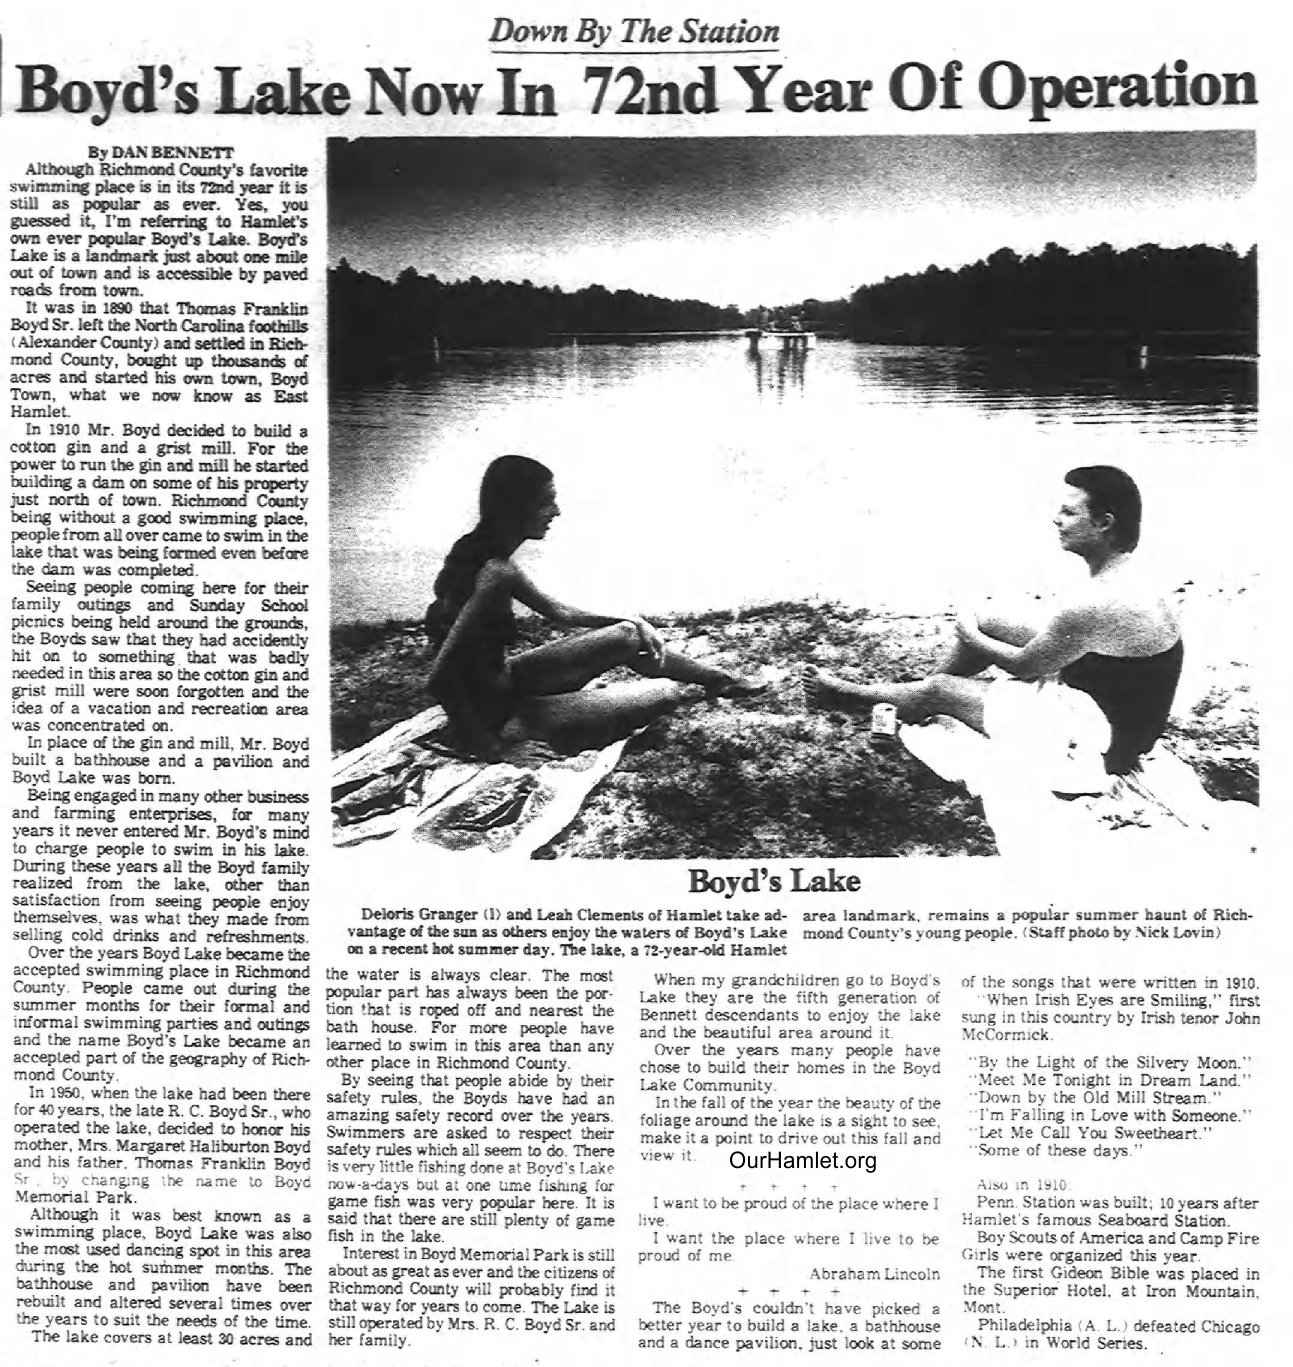 Down by the Station - Boyds Lake Now in 72nd Year of Operation OH.jpg